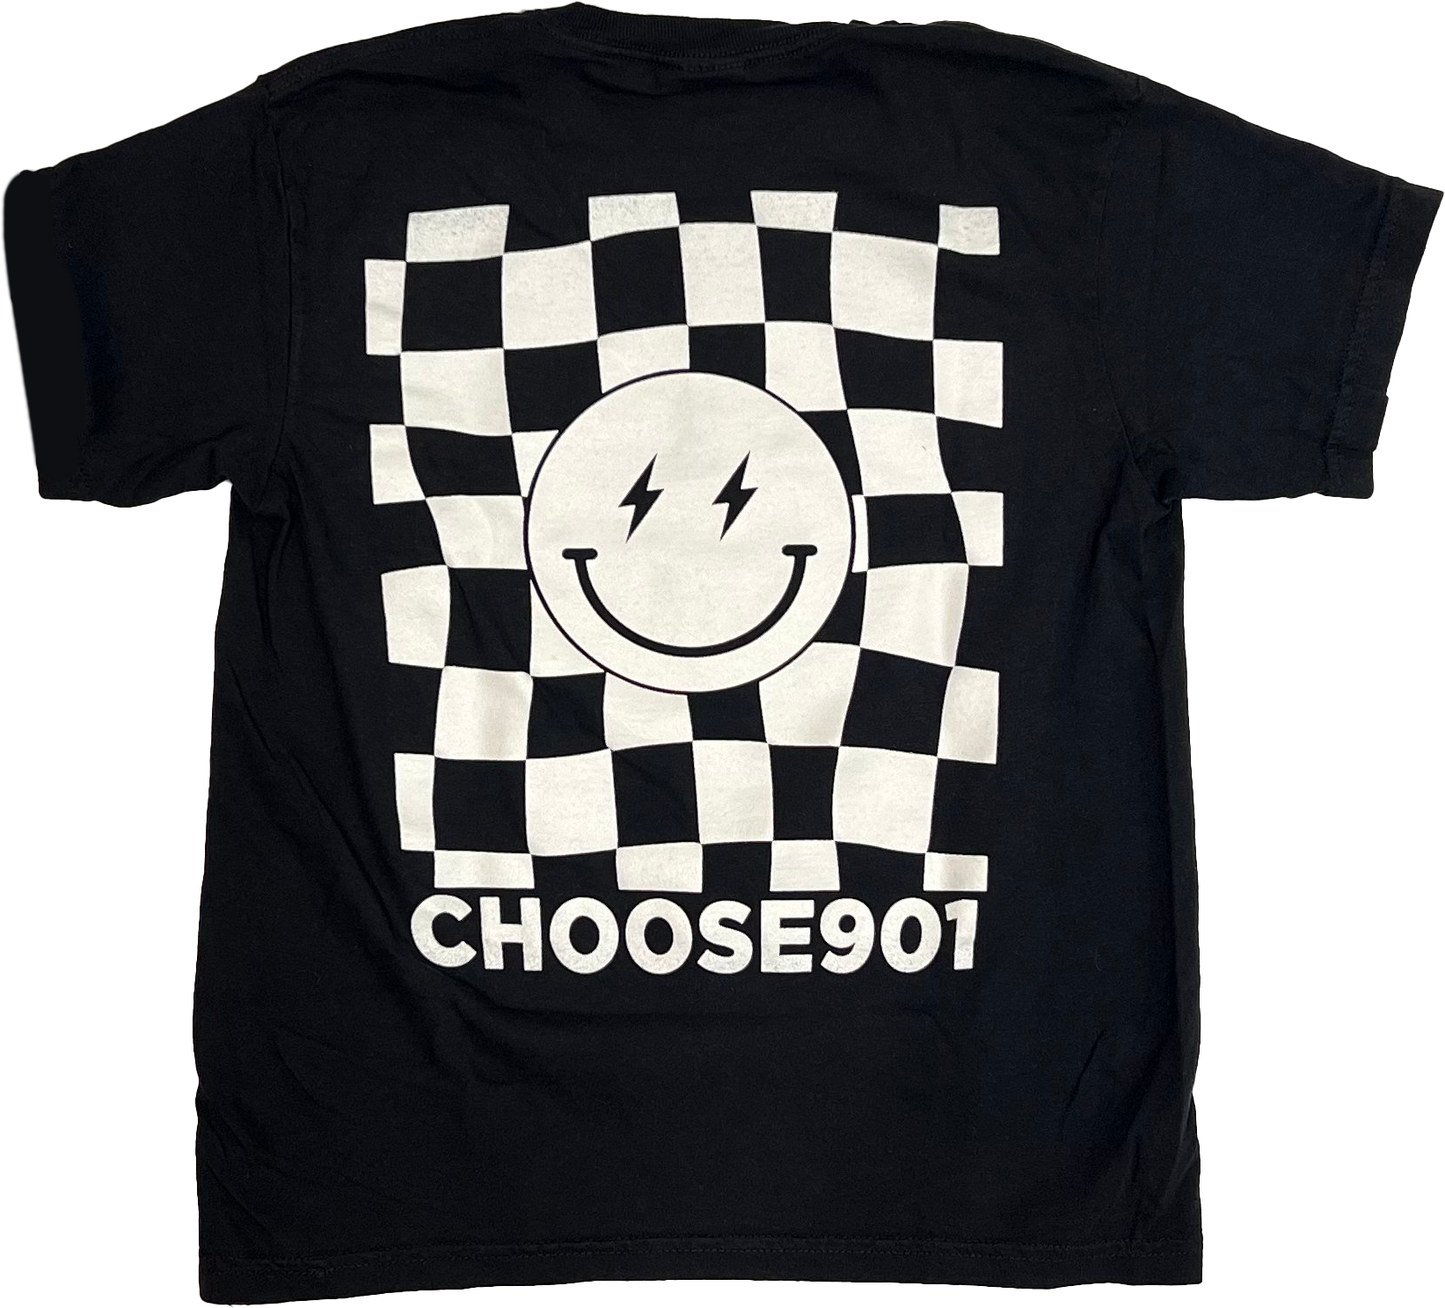 Choose901 Merch Shop's Youth Choose901 Lightning Smiley on Black shirt, featuring a checkered pattern and a smiling face design, with the text "choose901" at the bottom.